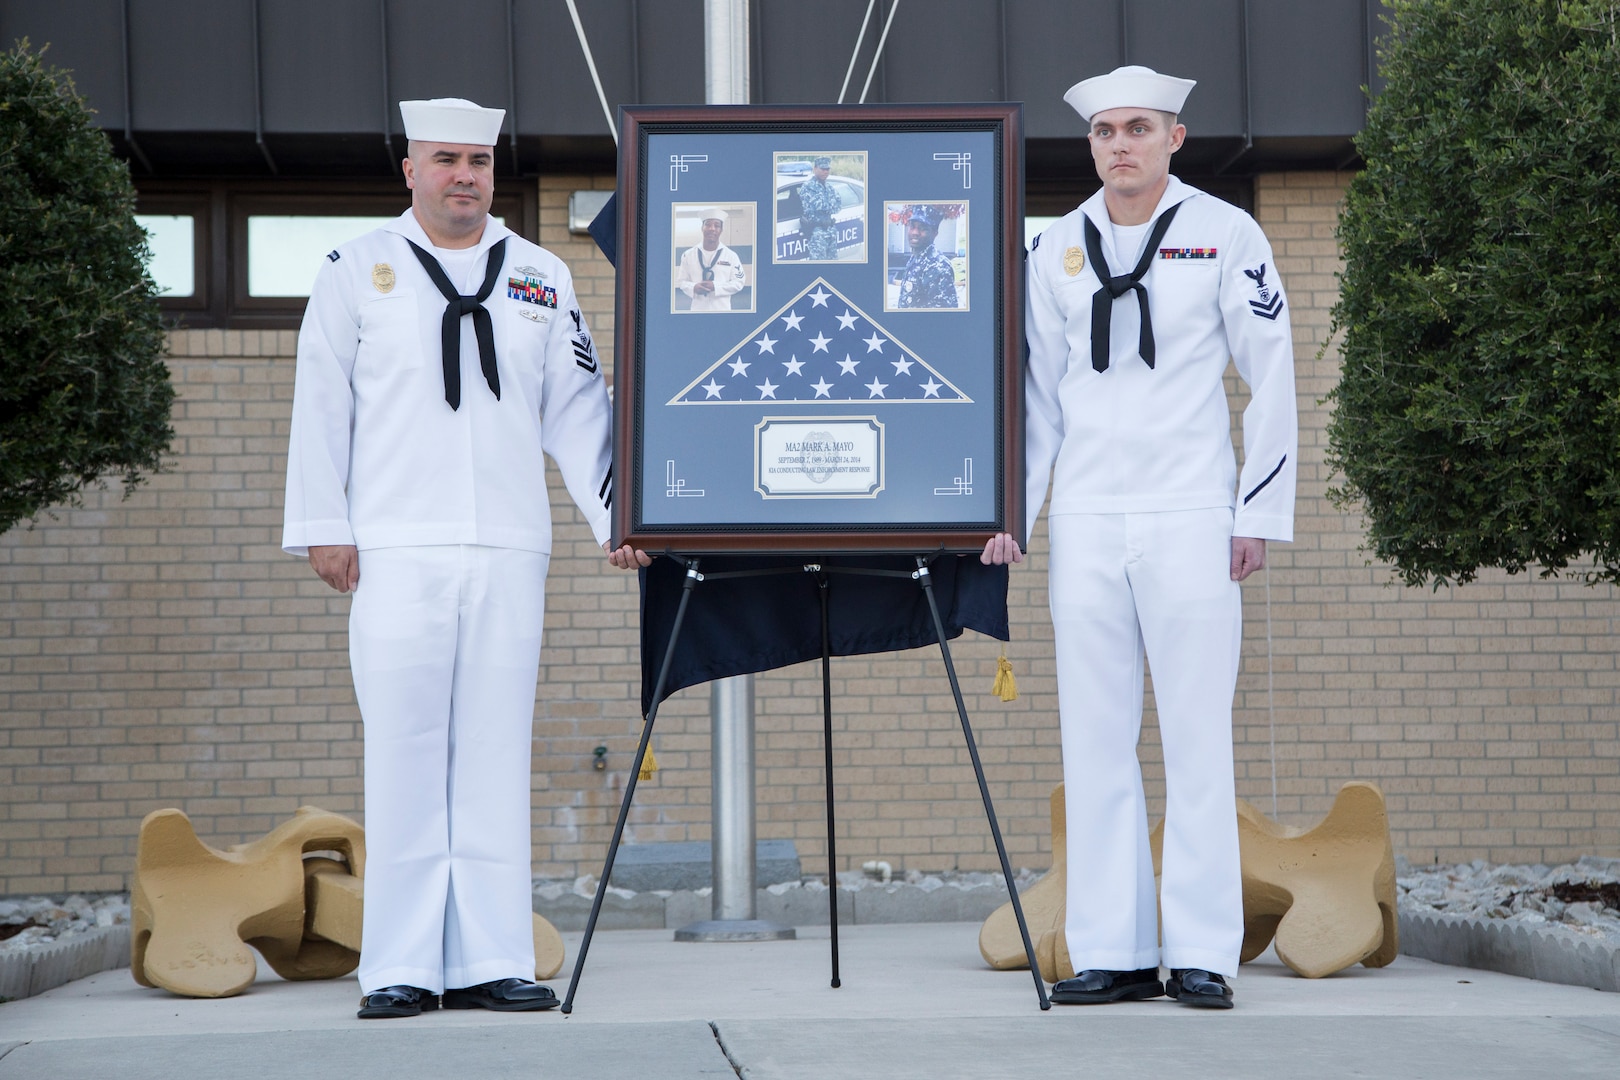 Petty officers unveil a memorial honoring Master-at-Arms 2nd Class Mark Mayo Oct. 3, 2014 at the Naval Technical Training Center Lackland. Mayo died in the line of duty in March 2014 while stationed aboard the USS Mahan (DDG-72) at Norfolk Naval Station, Va.. For his actions that day, Mayo was posthumously awarded the Navy Marine Corps Medal, the second-highest non-combat decoration awarded for heroism. (U.S. Air Force photo by Joshua Rodriguez/Released)